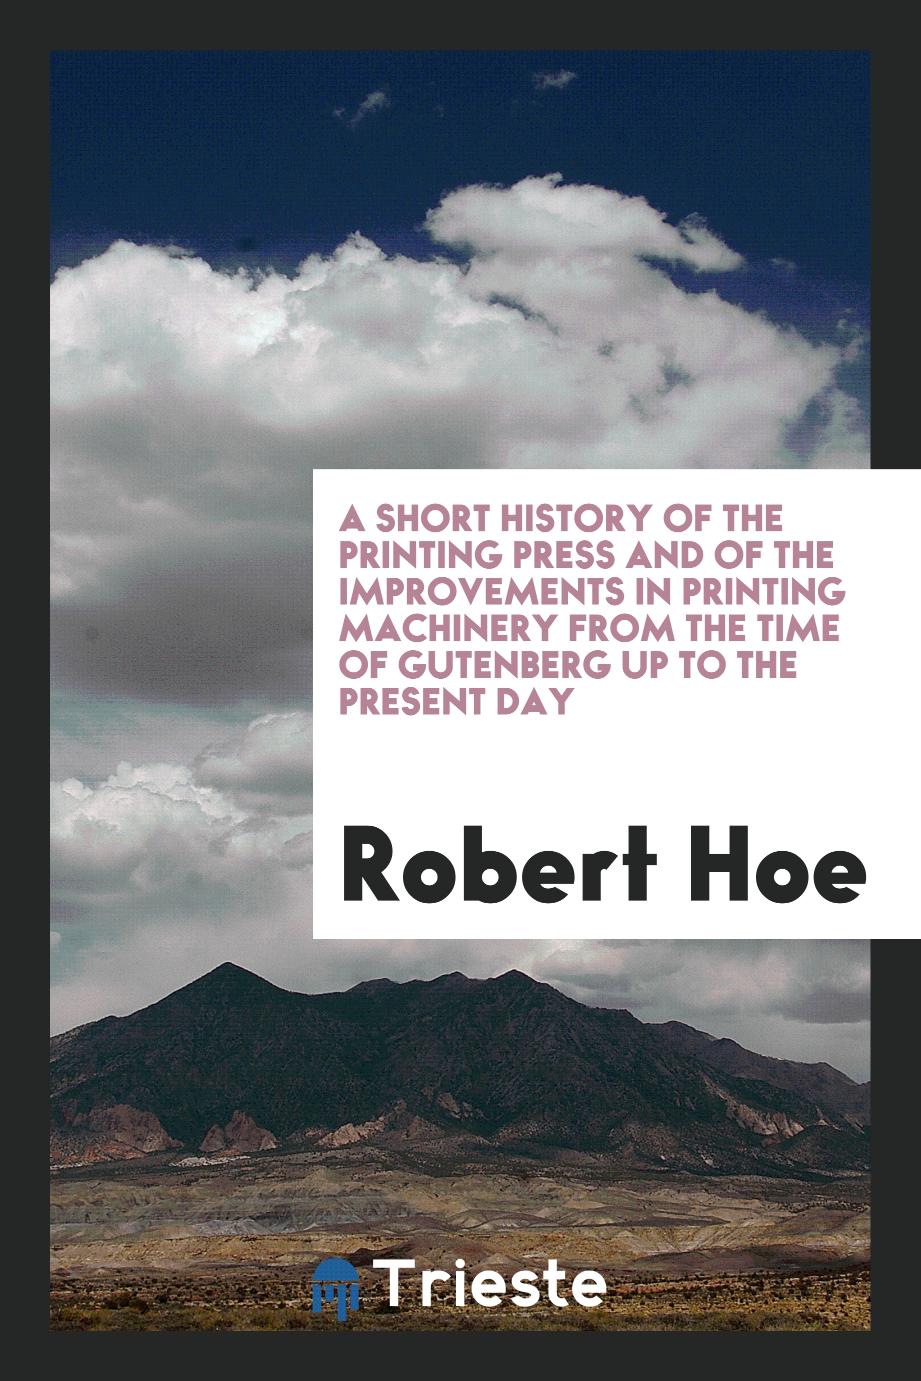 A Short History of the Printing Press and of the Improvements in Printing Machinery from the Time of Gutenberg up to the Present Day